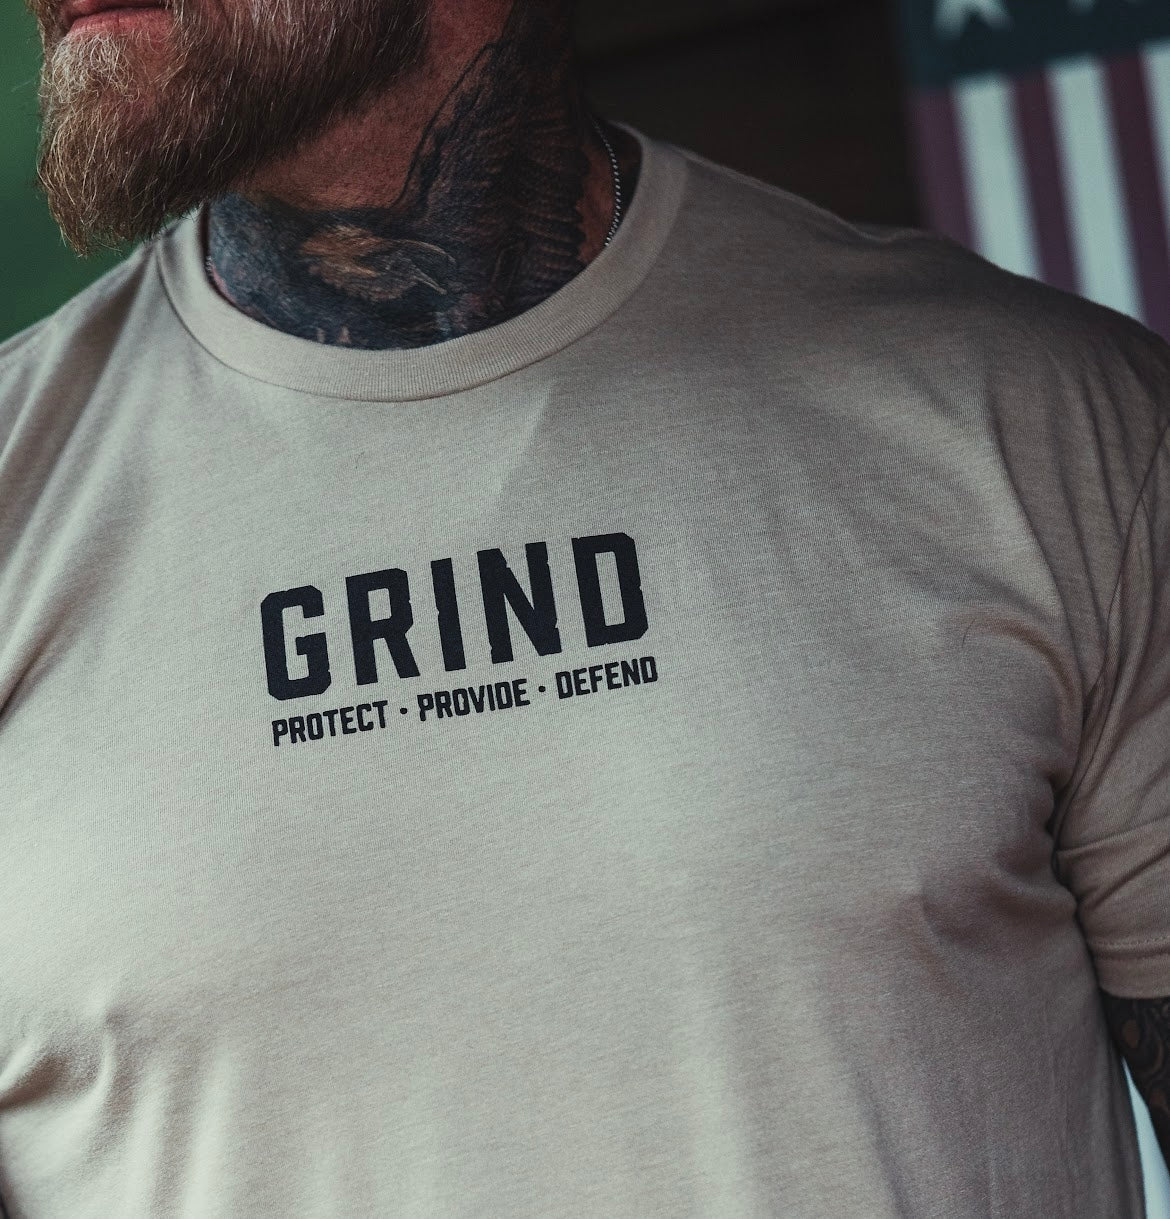 The Grind Athletics Graphic T-Shirt Protect Provide Defend II